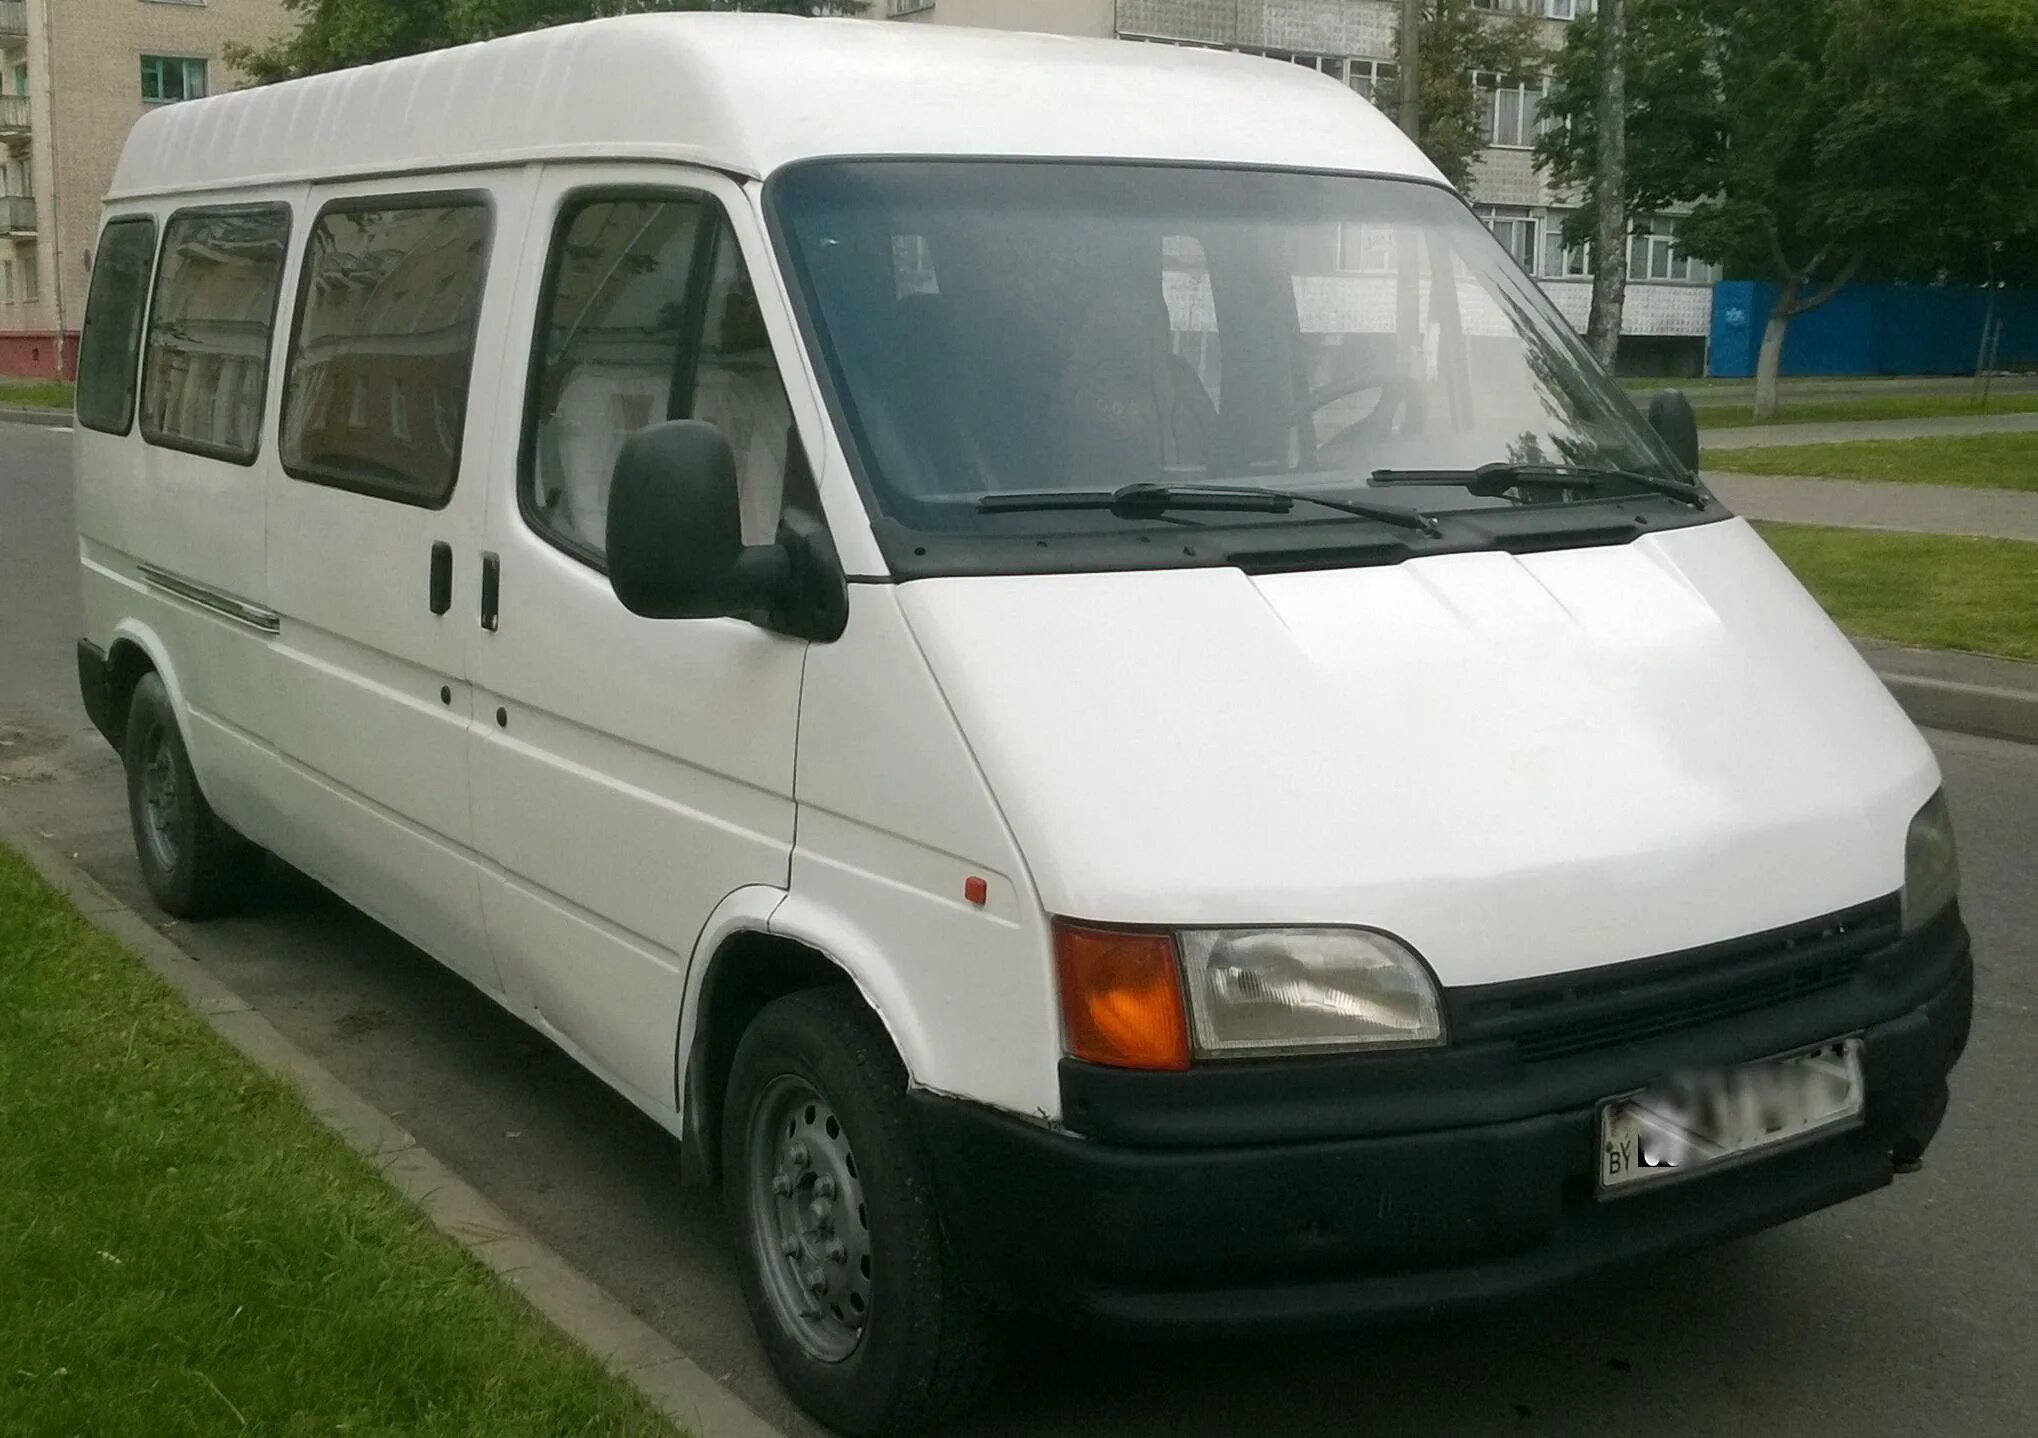 Ford Transit 1993. Форд Транзит 1993г. Ford Transit 2. Форд Транзит 2.5 дизель 1993г.